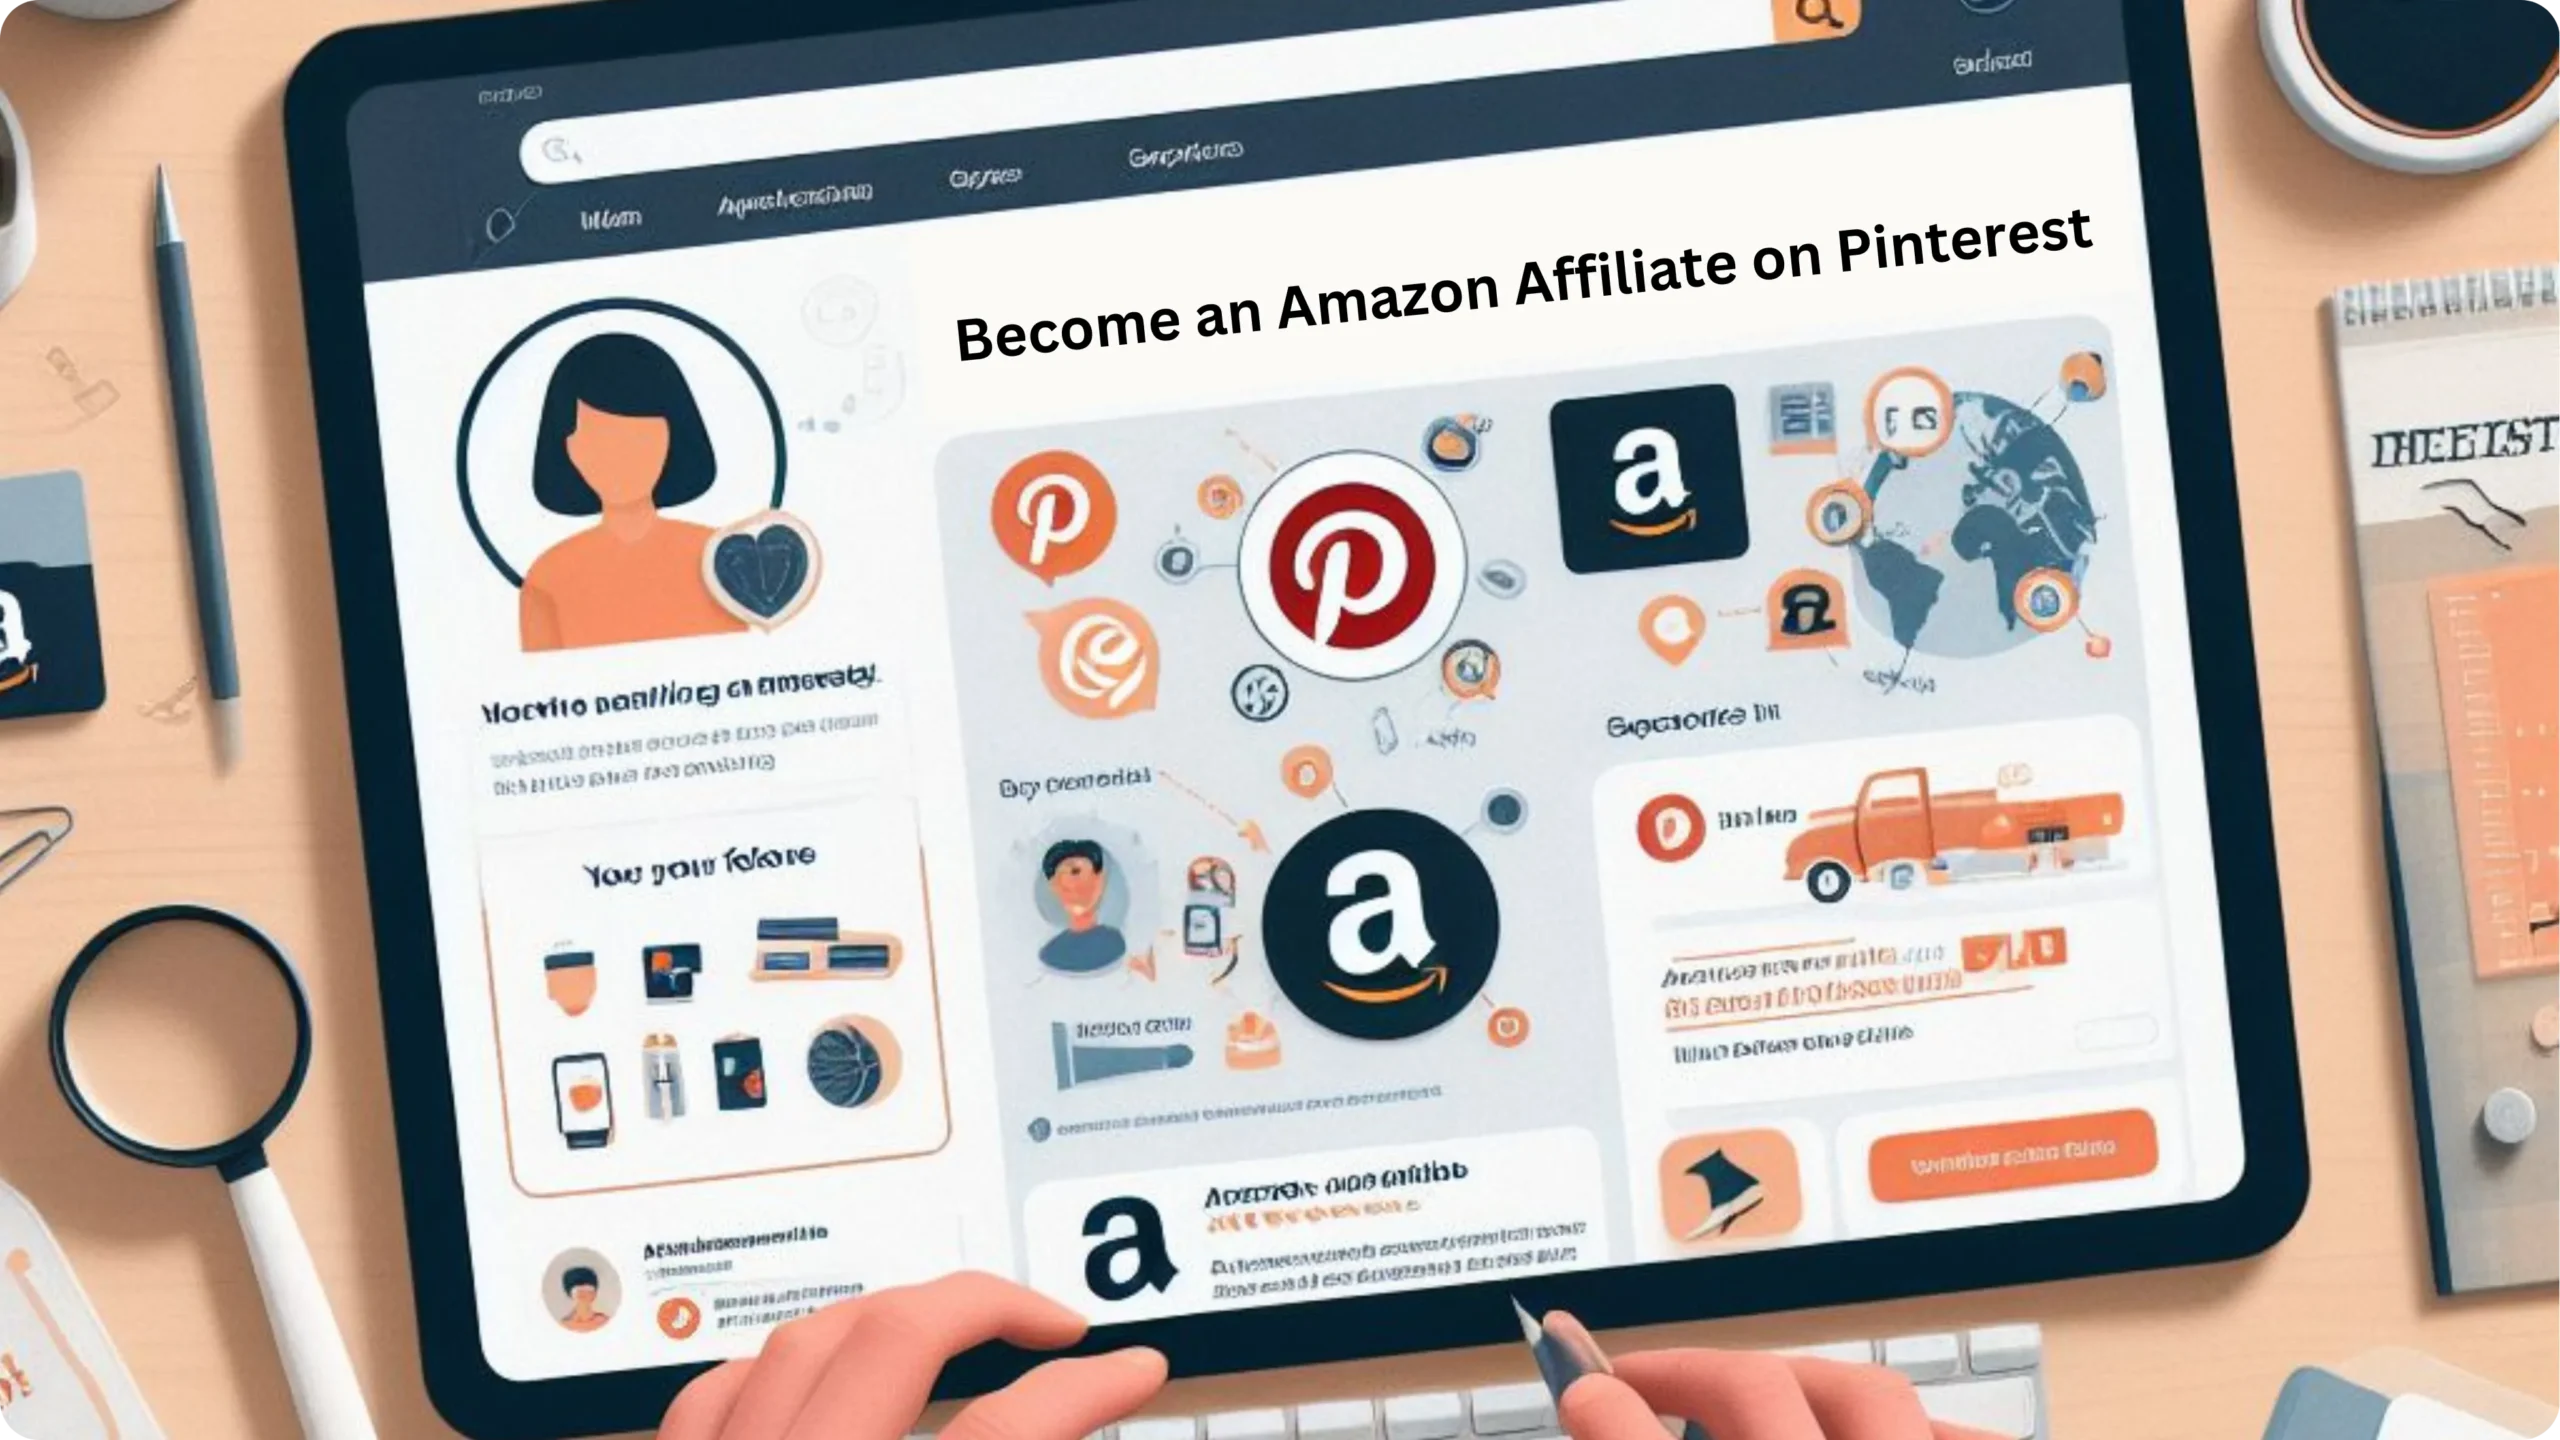 How To Become an Amazon Affiliate on Pinterest